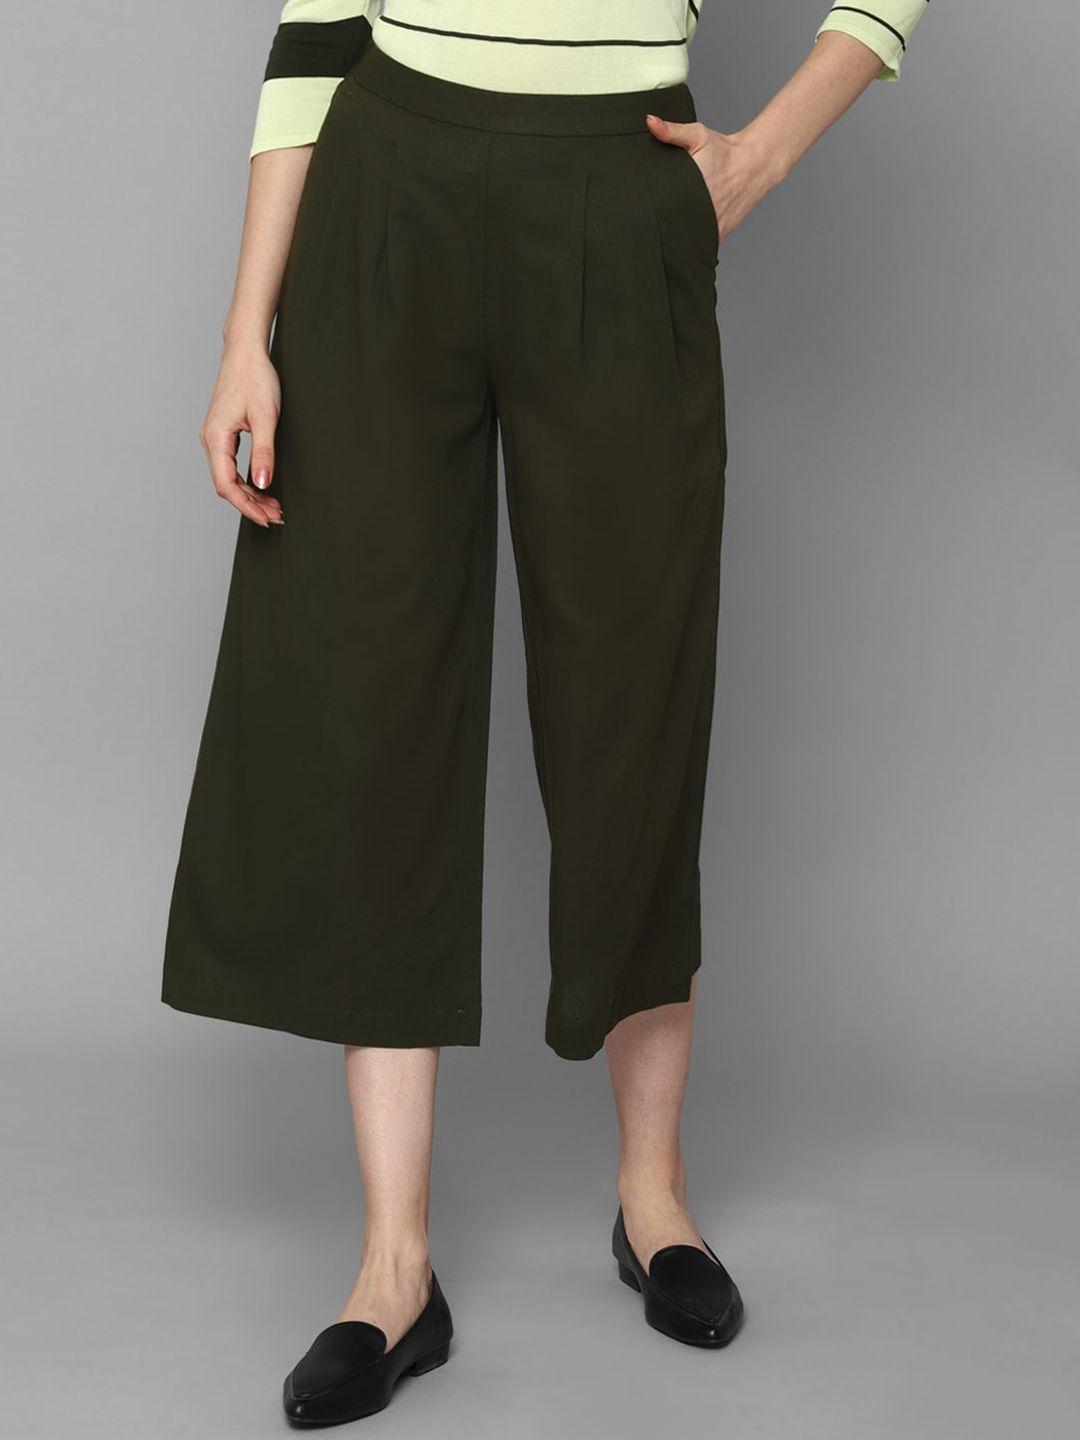 allen solly woman women olive green pleated culottes trousers